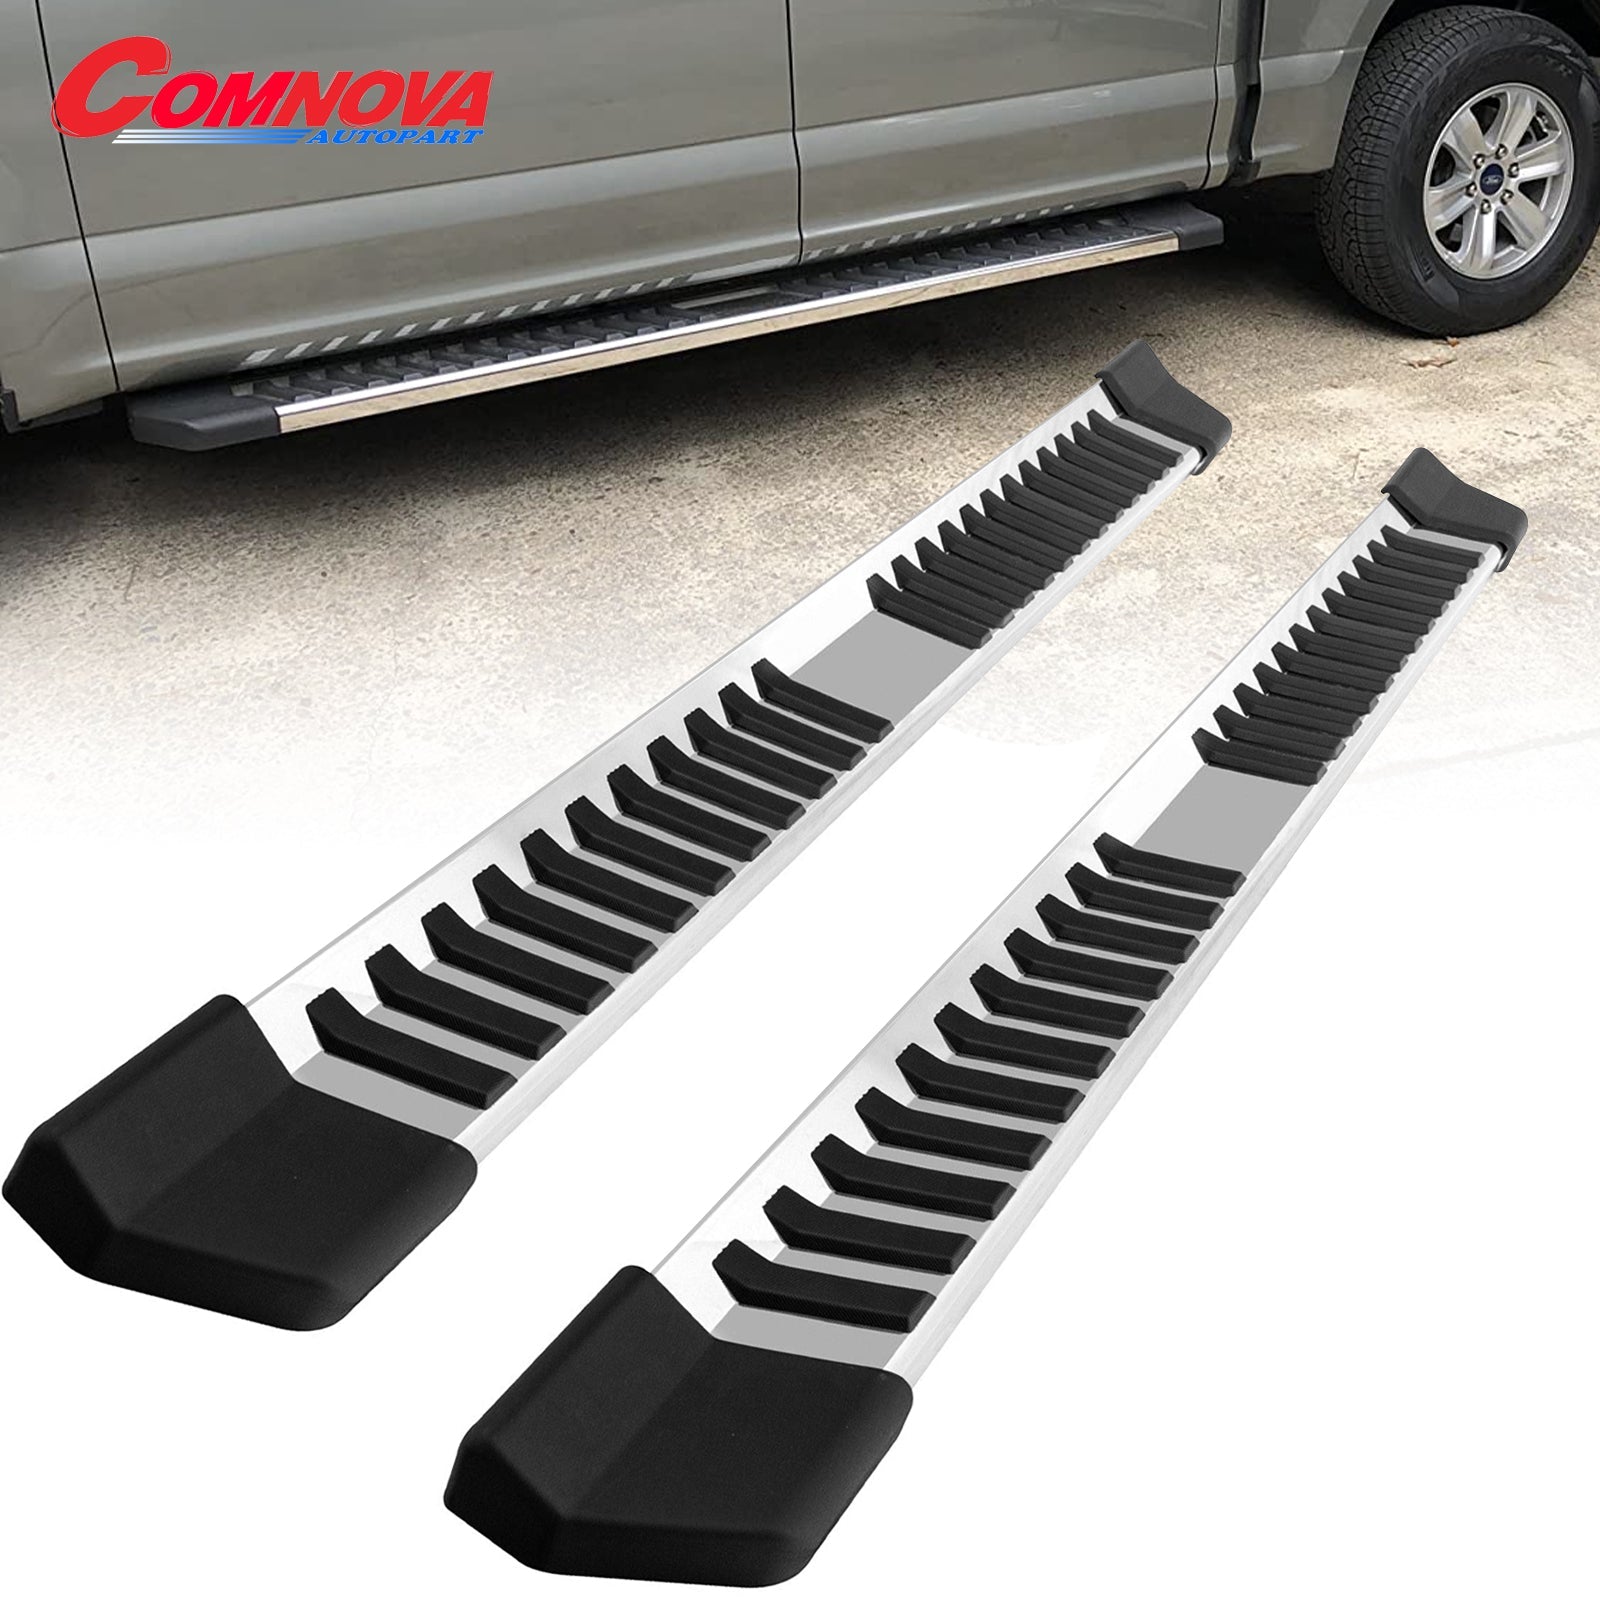 Stainless Steel Running Boards for 2004-2014 Ford F150 Crew Cab V6 Style.- COMNOVA AUTOPART